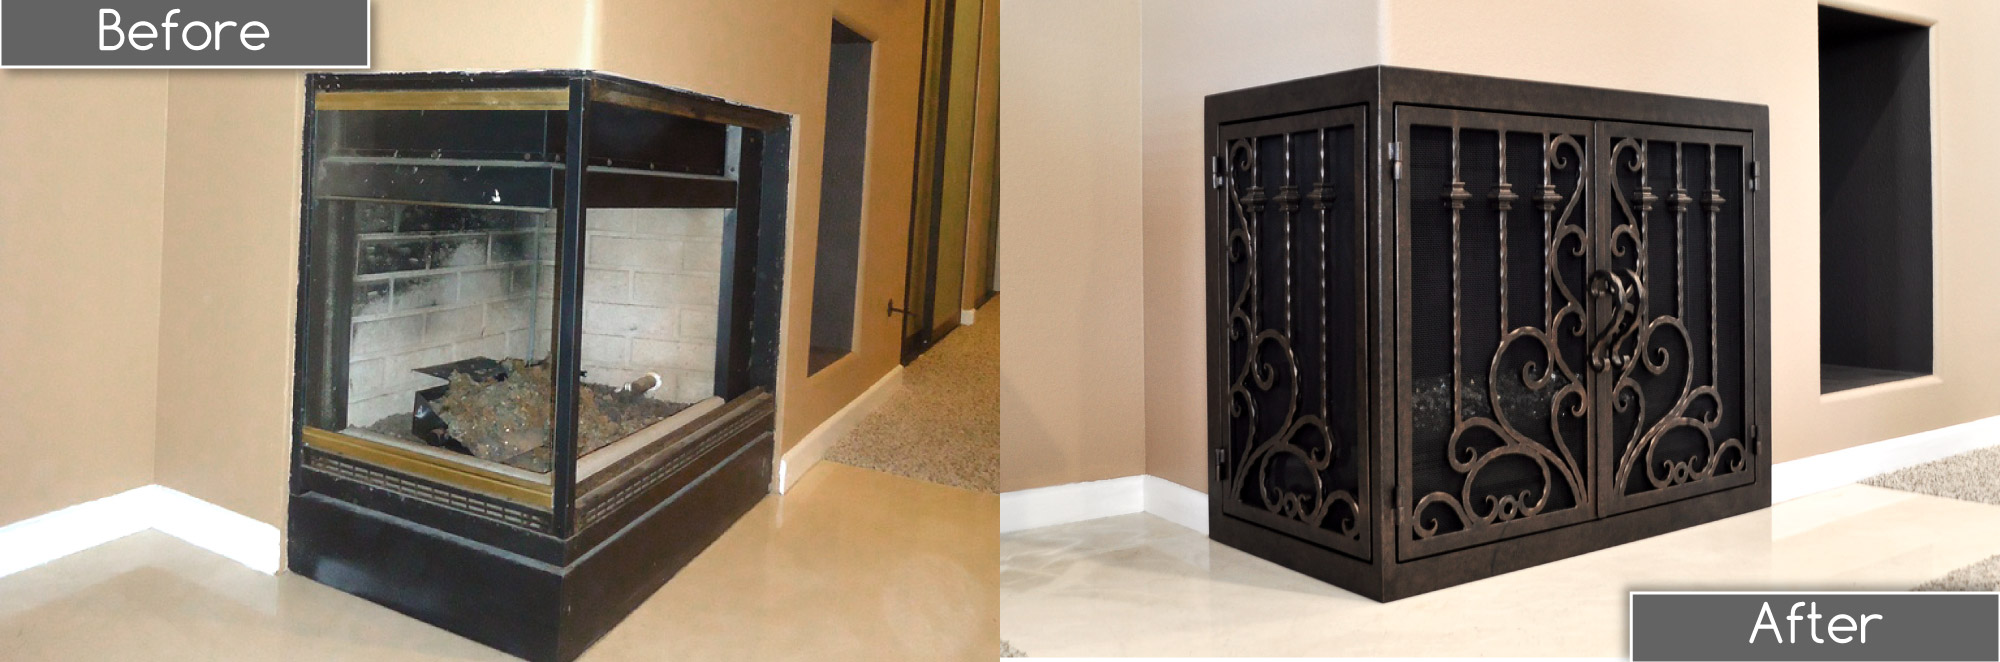 L-Shaped Fireplace Door - Protection 10 Before and After